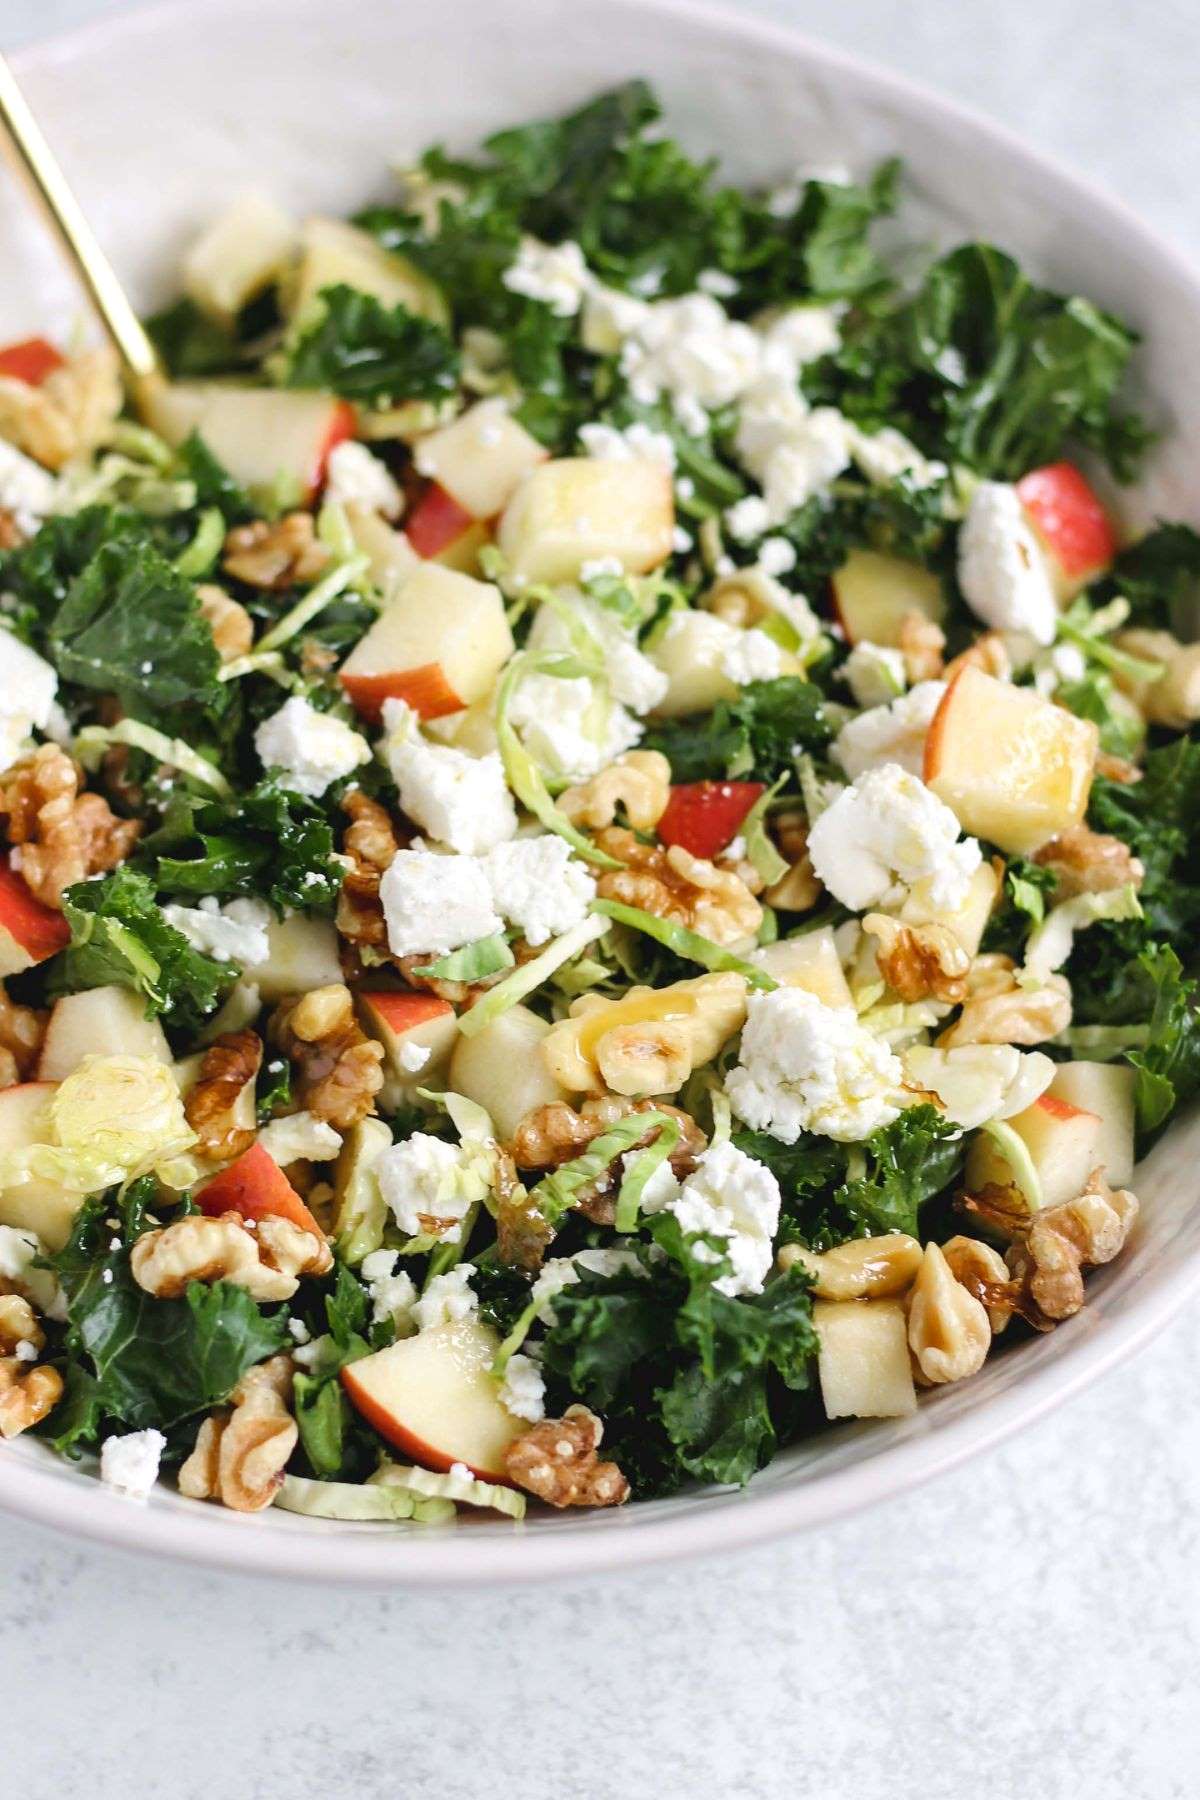 Kale salad with shaved Brussels sprouts topped with apples, walnuts, and goat cheese crumbles in a white serving bowl.